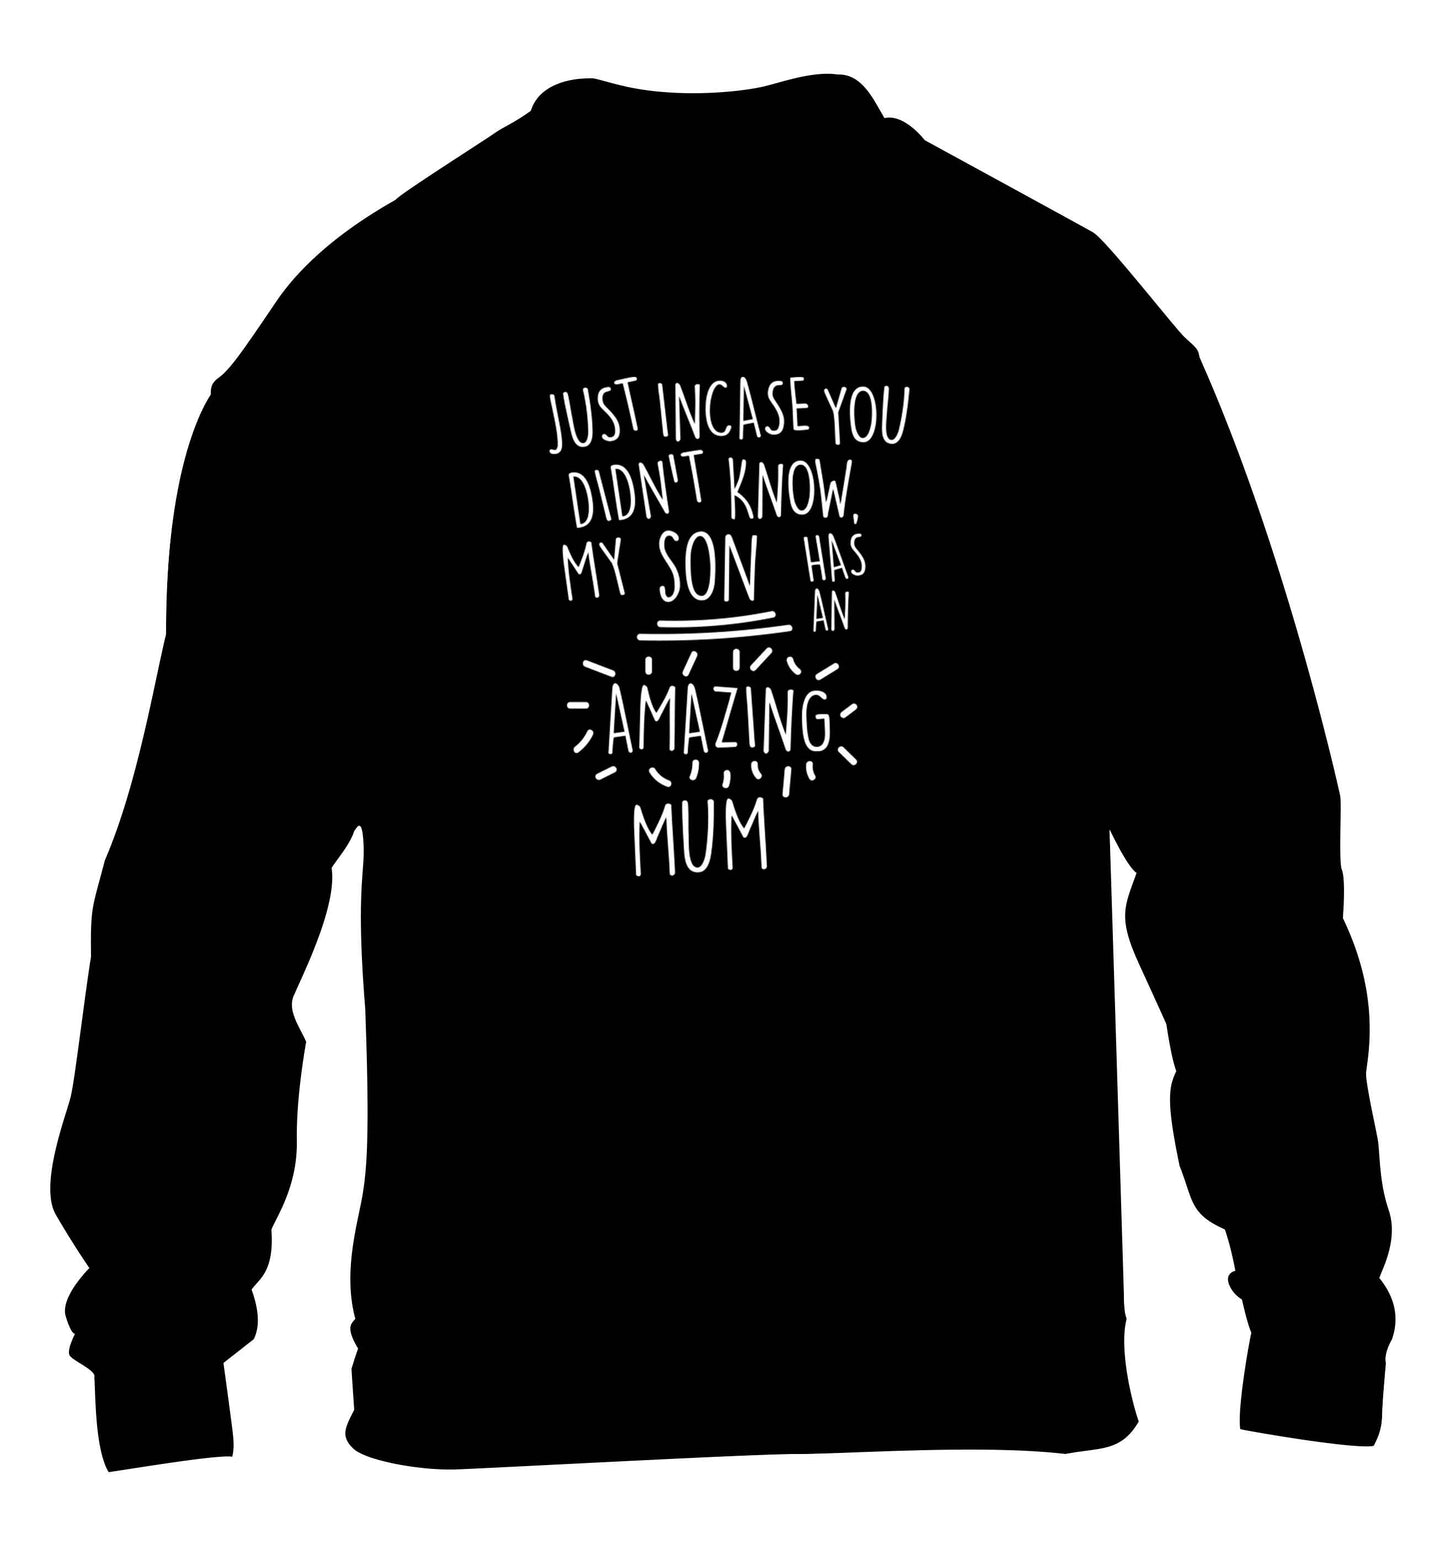 Just incase you didn't know my son has an amazing mum children's black sweater 12-13 Years